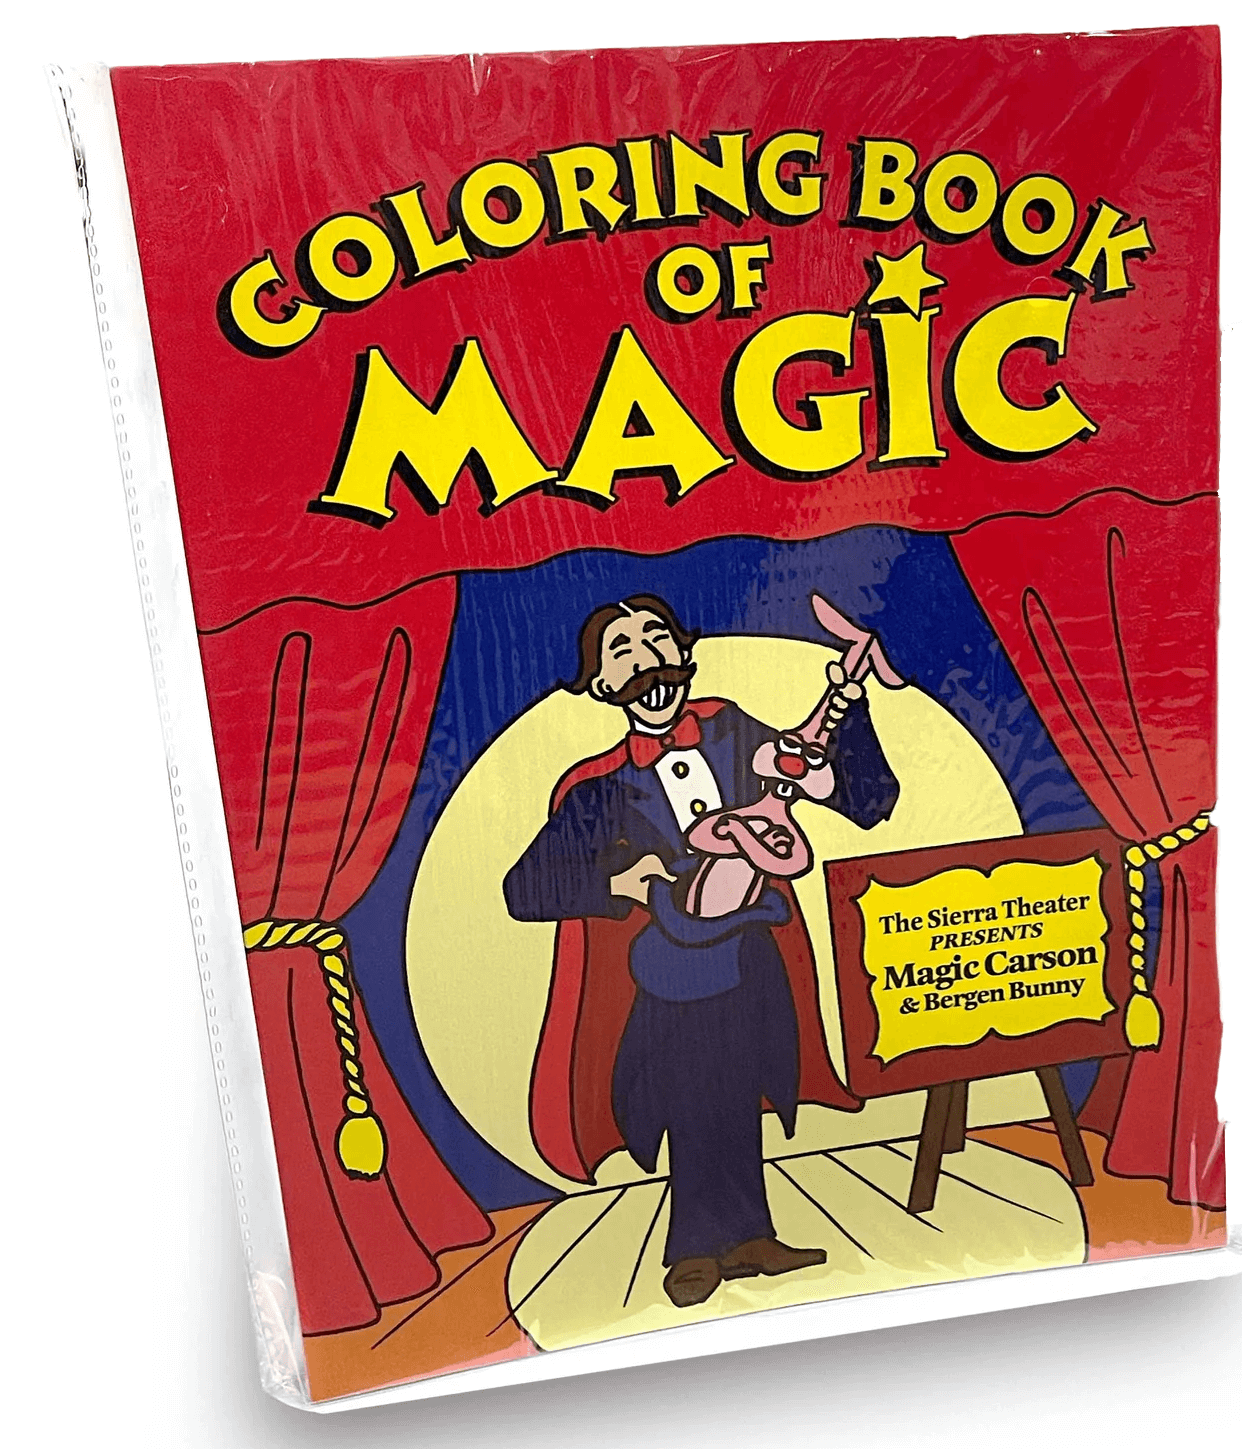 Magic Coloring Book with Vanishing Crayons